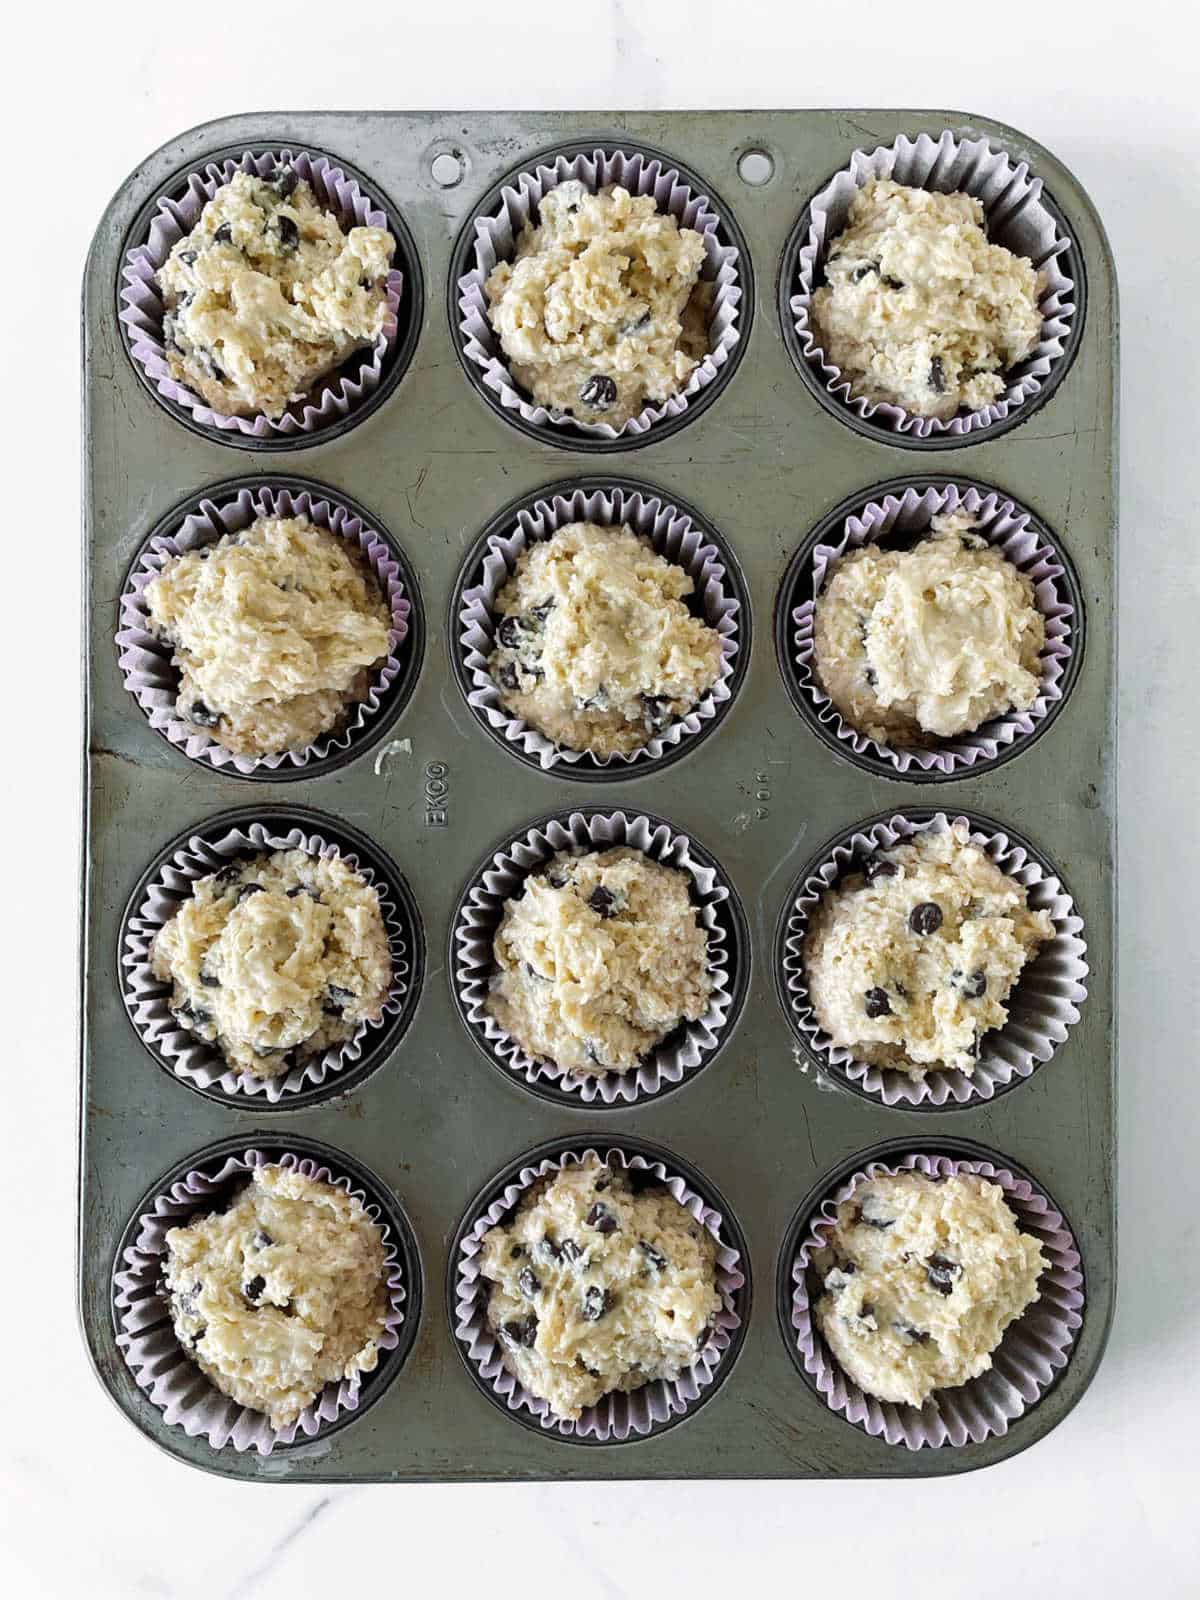 Metal muffin pan with paper liners and oatmeal chocolate chip muffin batter. White surface.